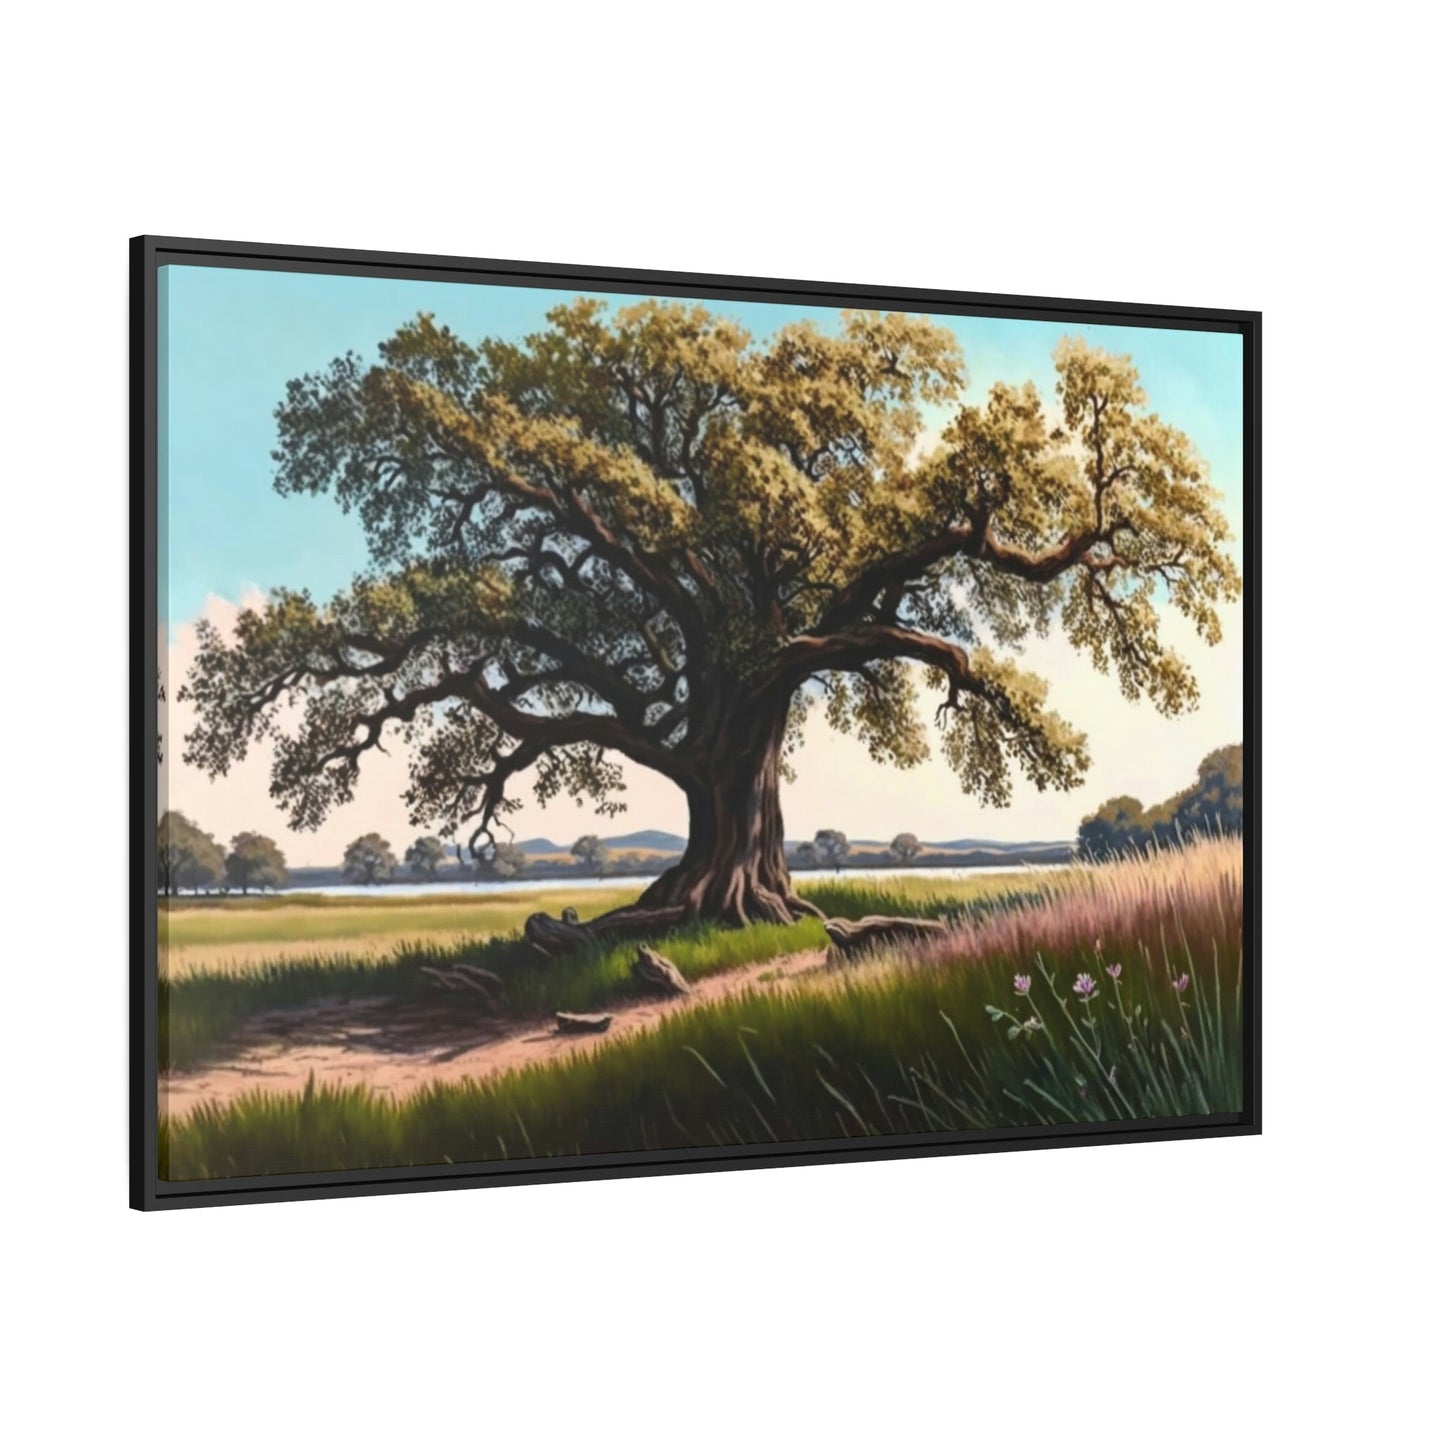 The Majesty of Oak Trees: A Regal Display of Nature's Grandeur